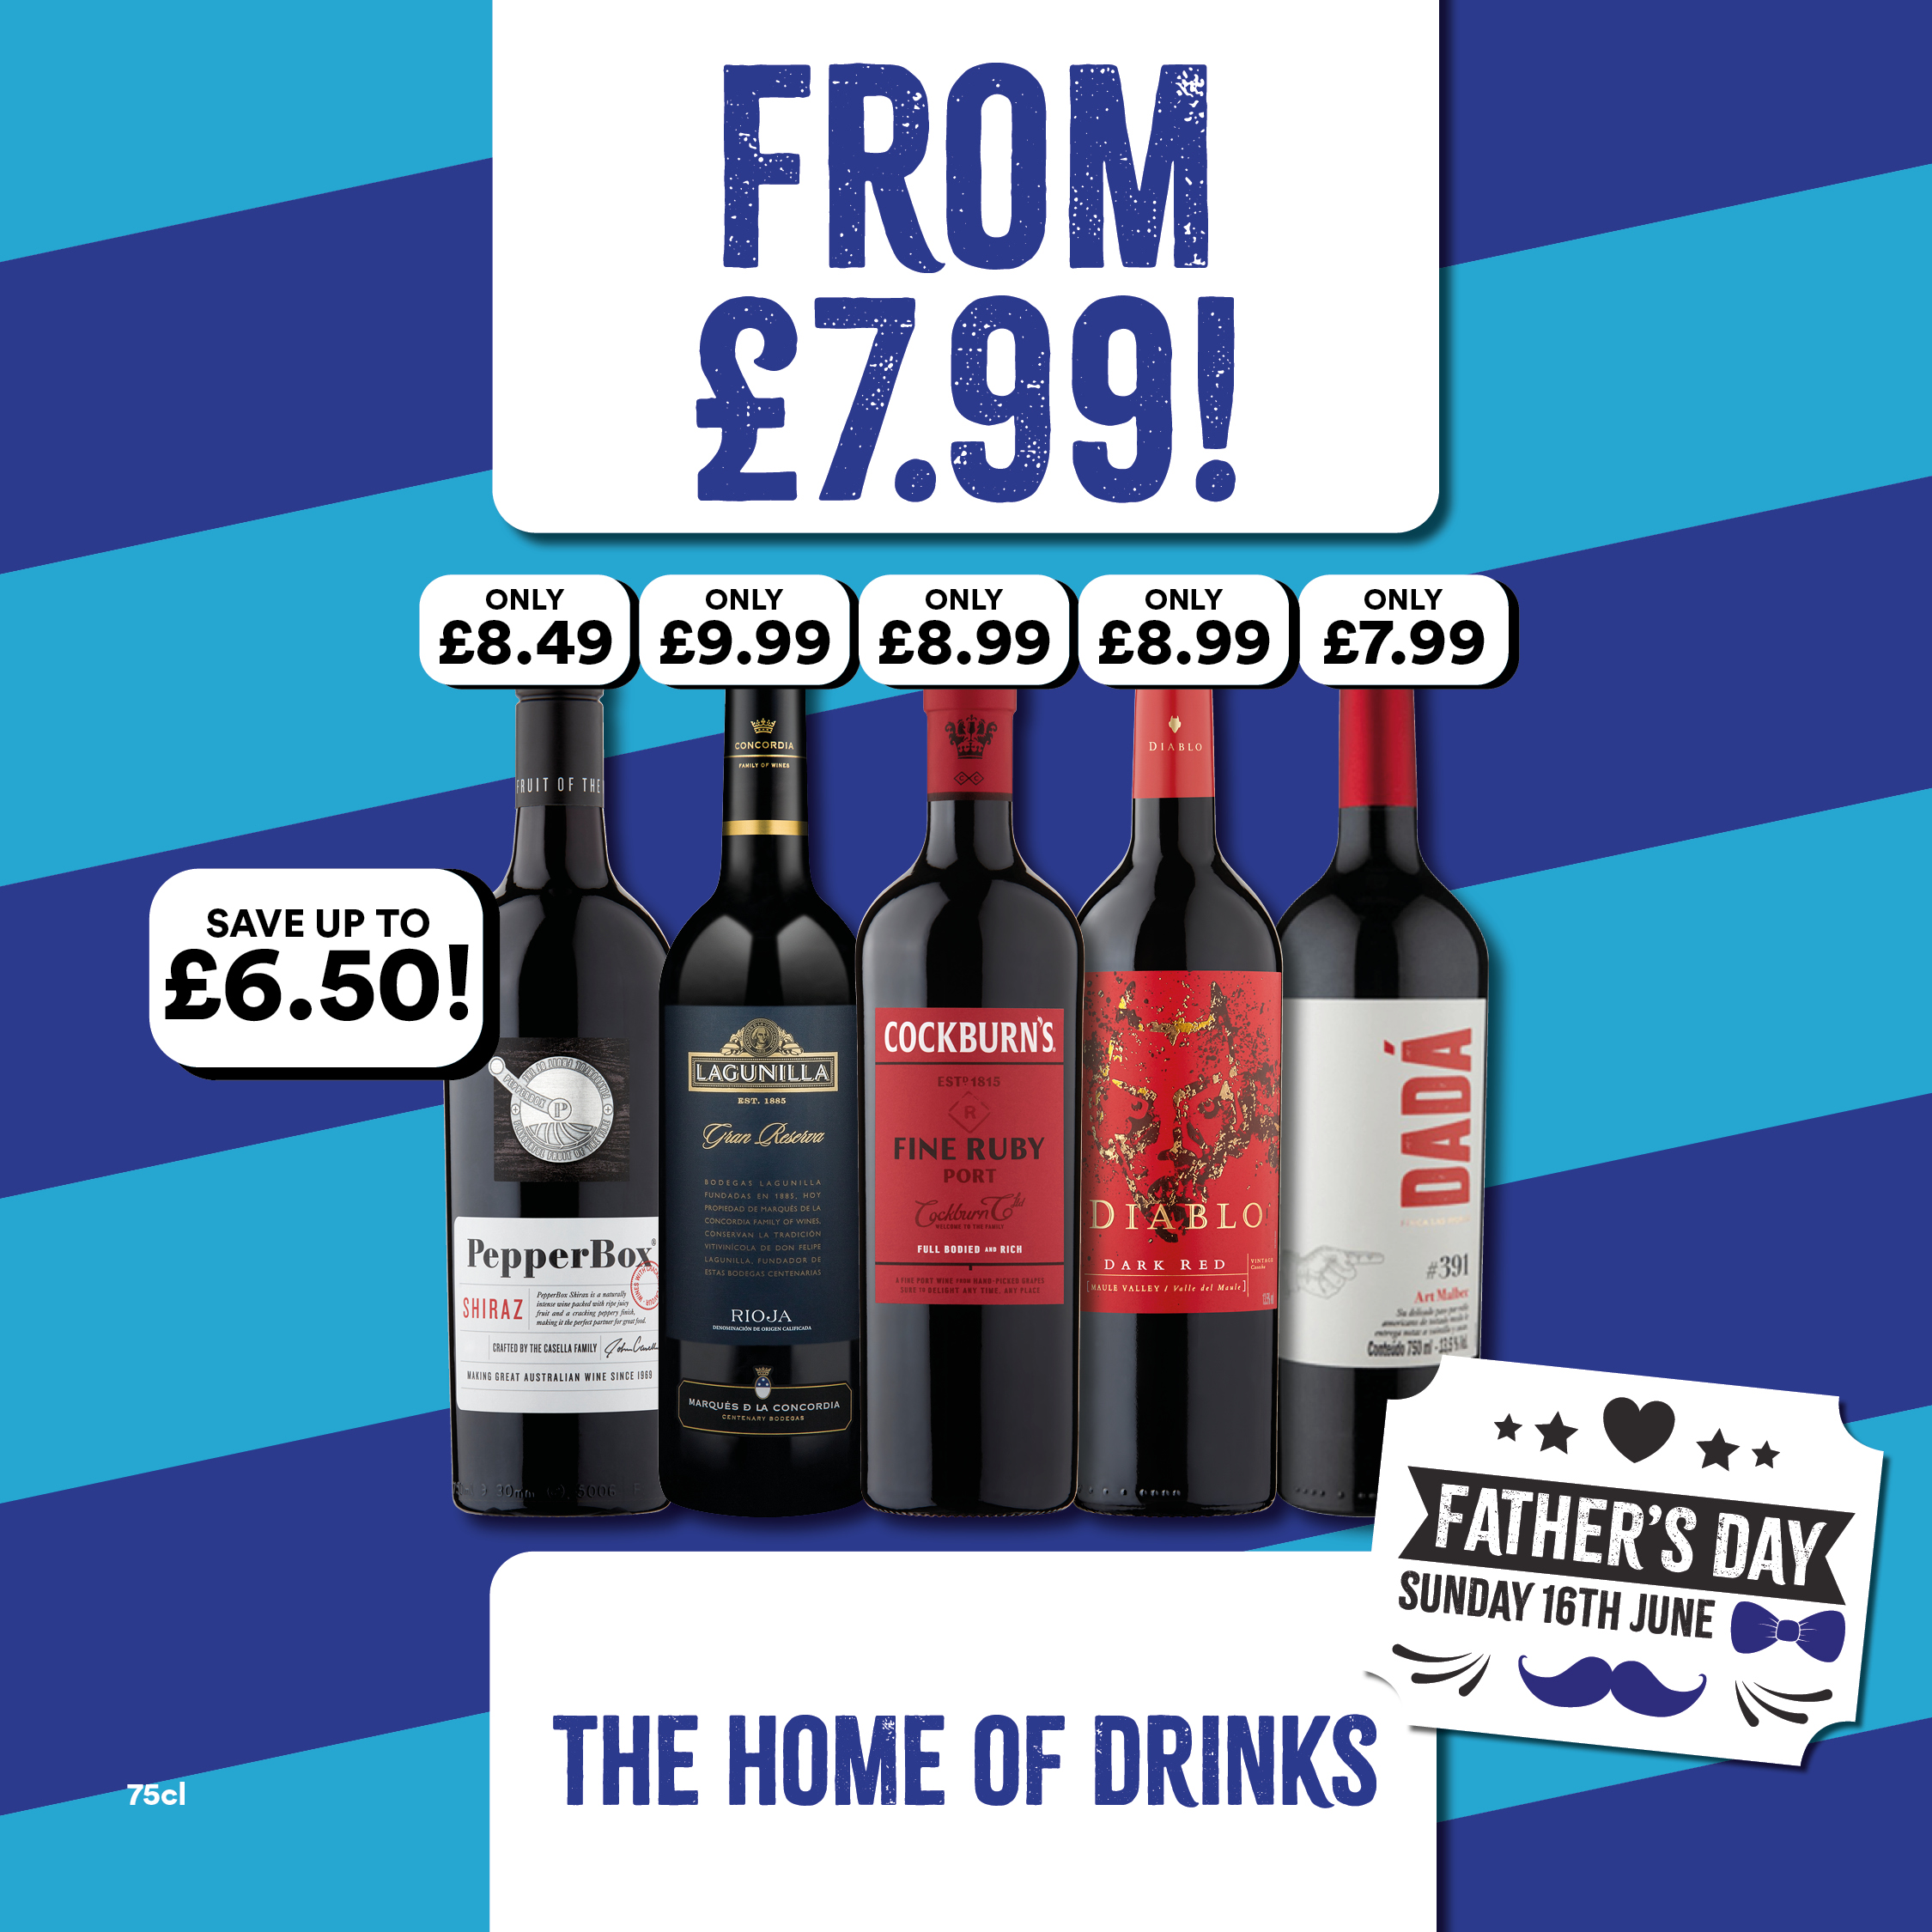 From £7.99 on selected wines Bargain Booze Ormskirk 01695 424013